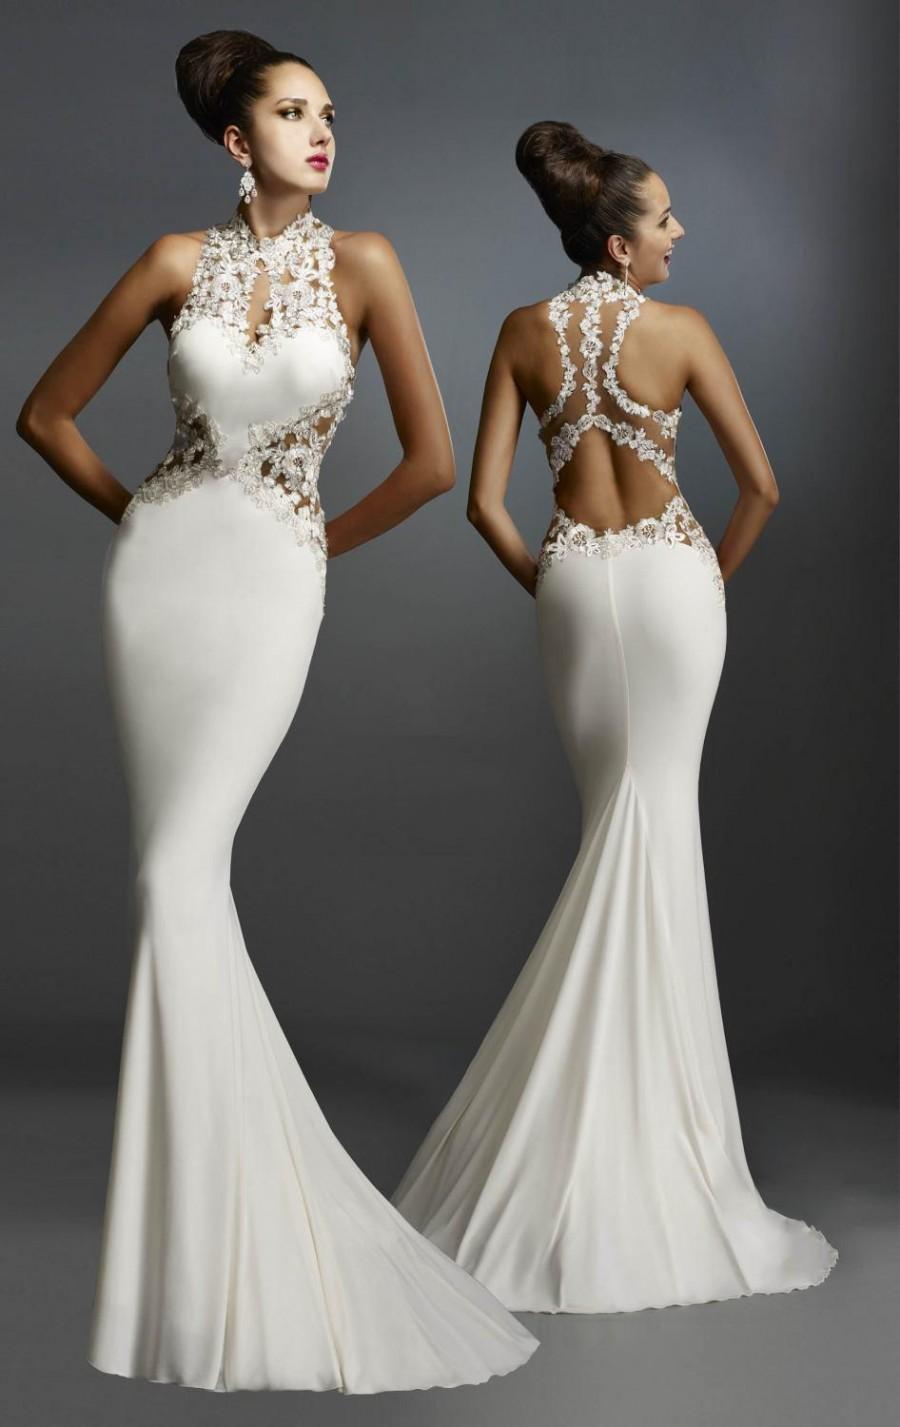 Mariage - Janique 2015 Sexy White Evening Dresses Mermaid Embroidered Sheer High Neck Lace Backless Sweep See Through Custom Prom Dresses Gowns Party, $108.05 